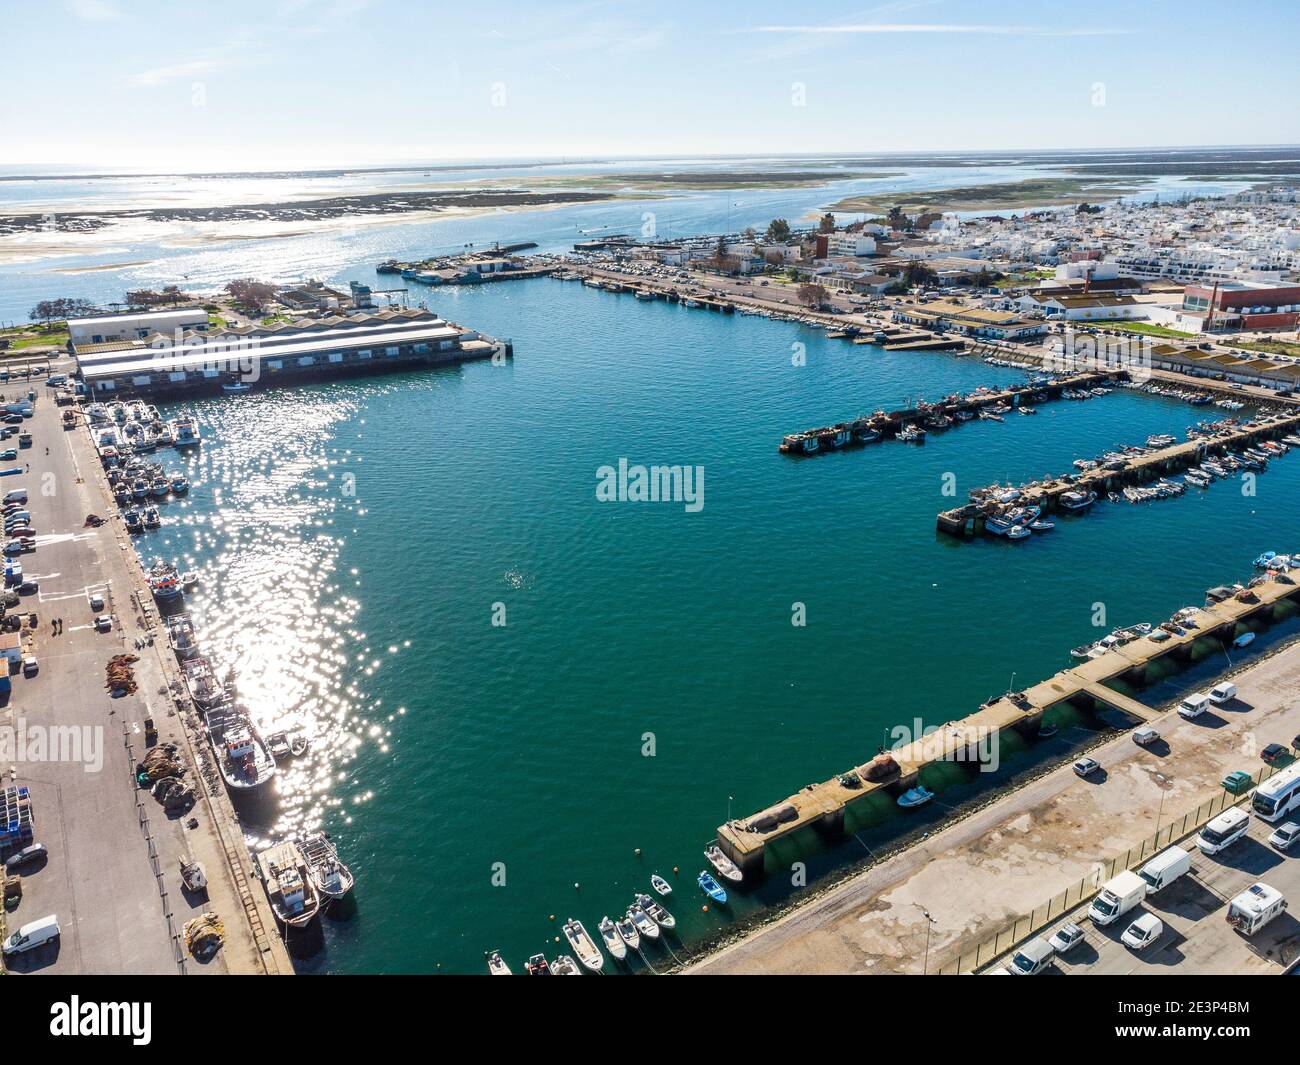 Aerial view of industrial harbor and town of Olhao, Algarve, Portugal Stock Photo